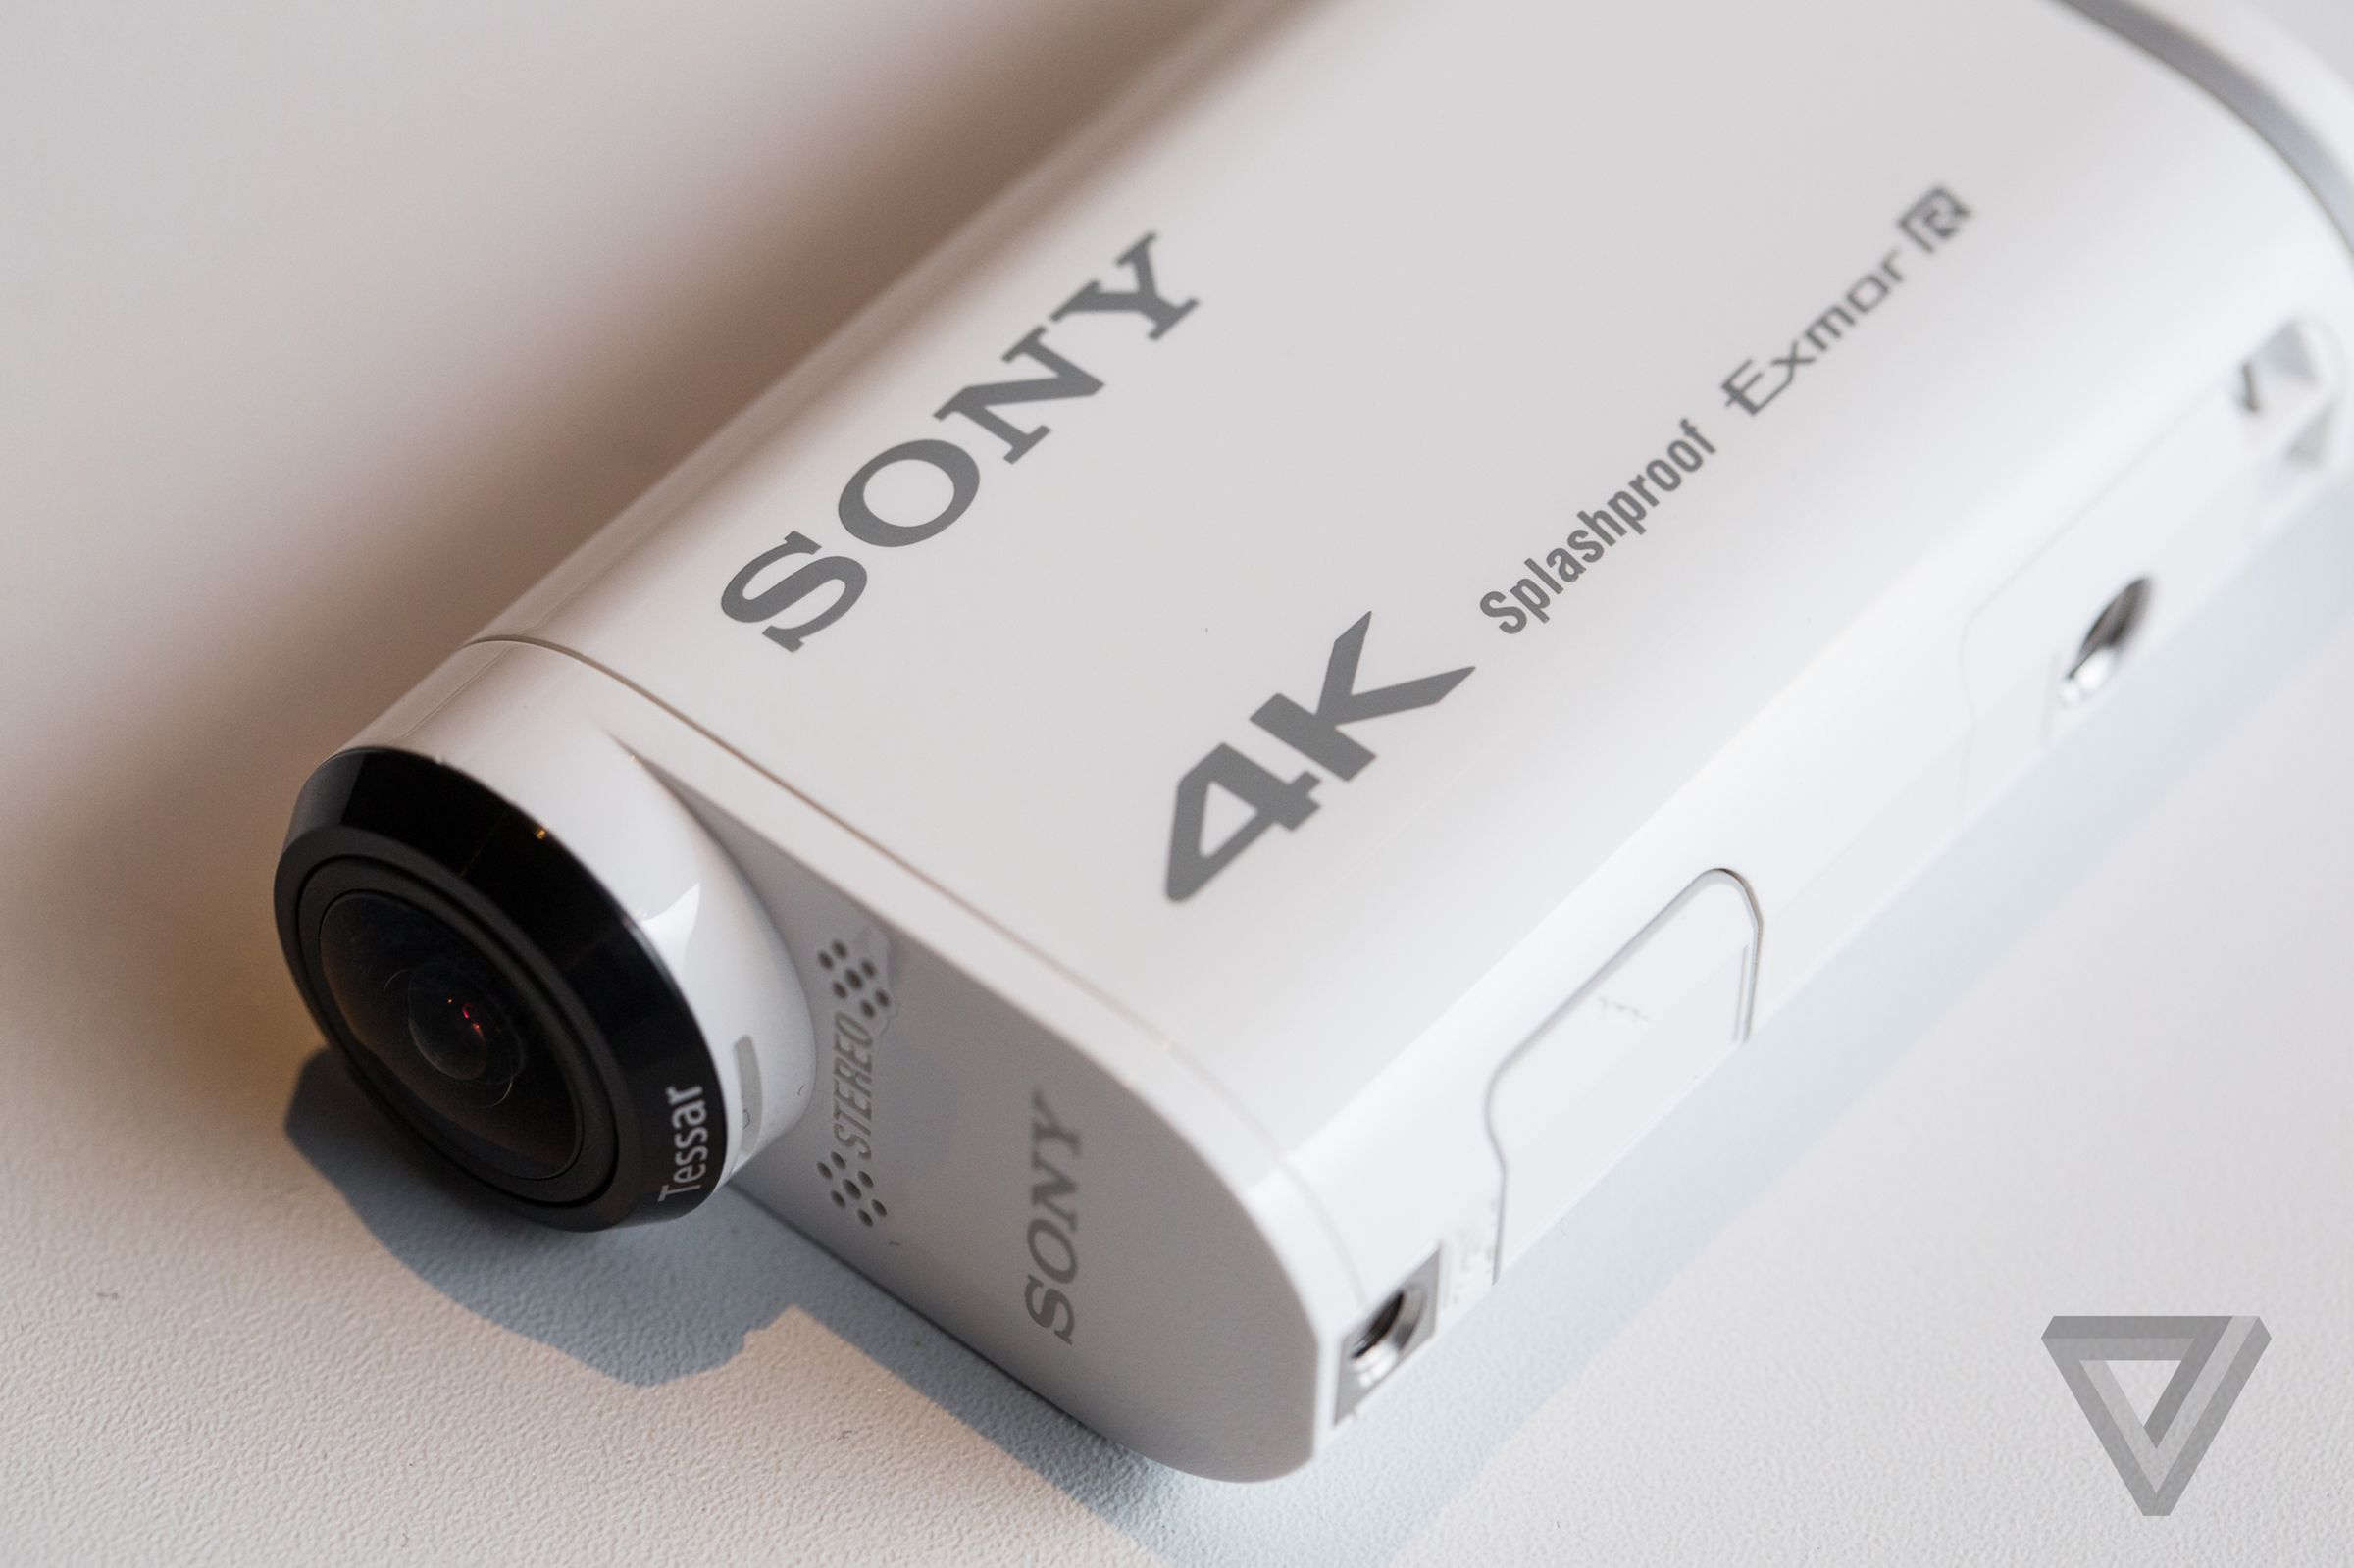 Sony Action Cam AS1000V hands on photos